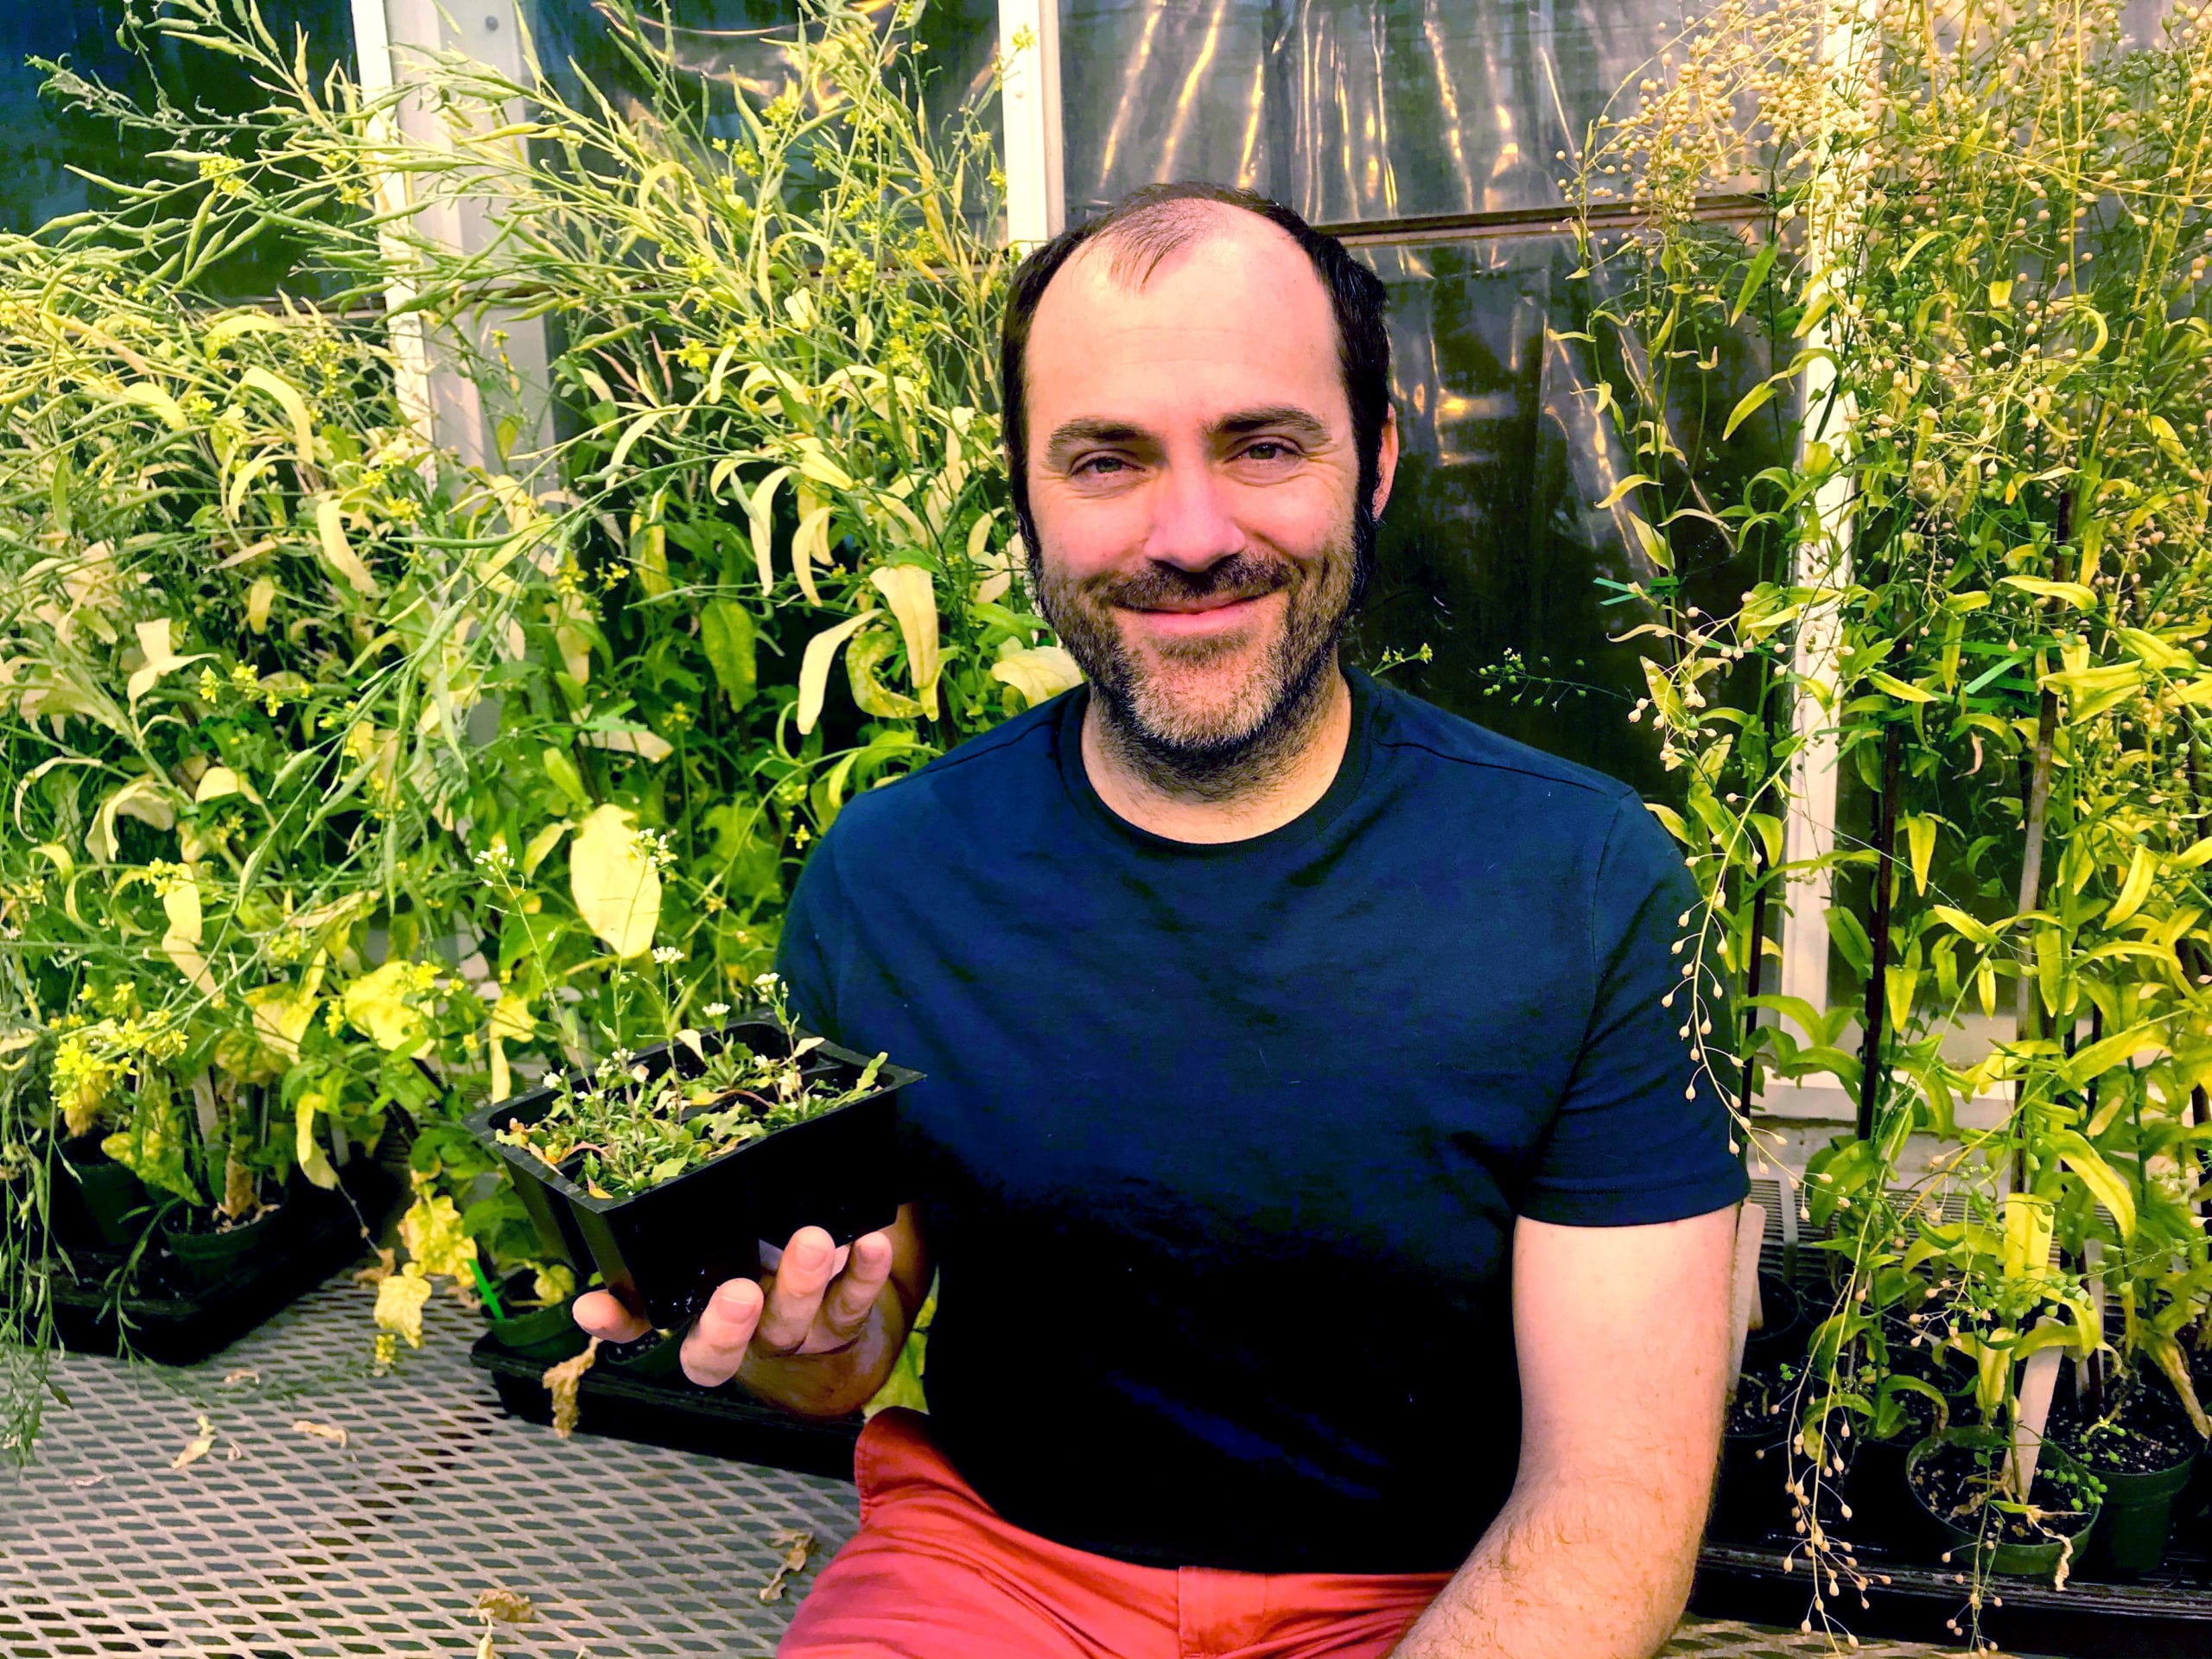 Medium closeup photo of Andrew Nelson smiling and holding a four-pack of small plants, Eutrema salsugineum. He is sitting on table in a greenhouse. Behind him are larger specimens of Eutrema salsugineum, which reach slightly above his head.